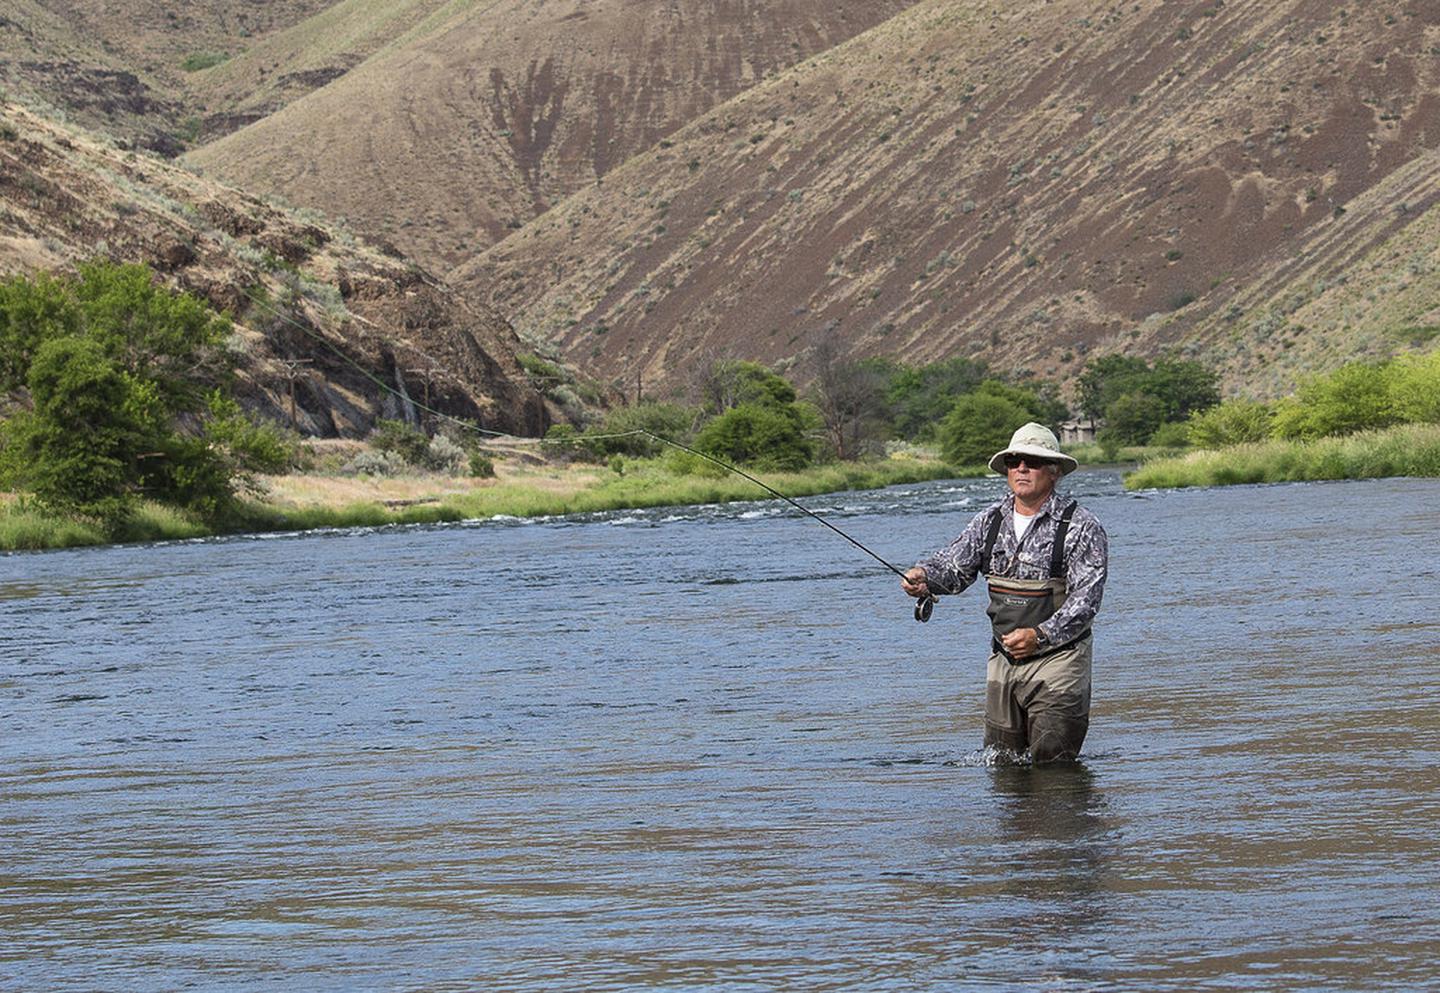 A fly fisherman tries his luck on the Deschutes river.A fly fisherman tries his luck on the Deschutes river.
